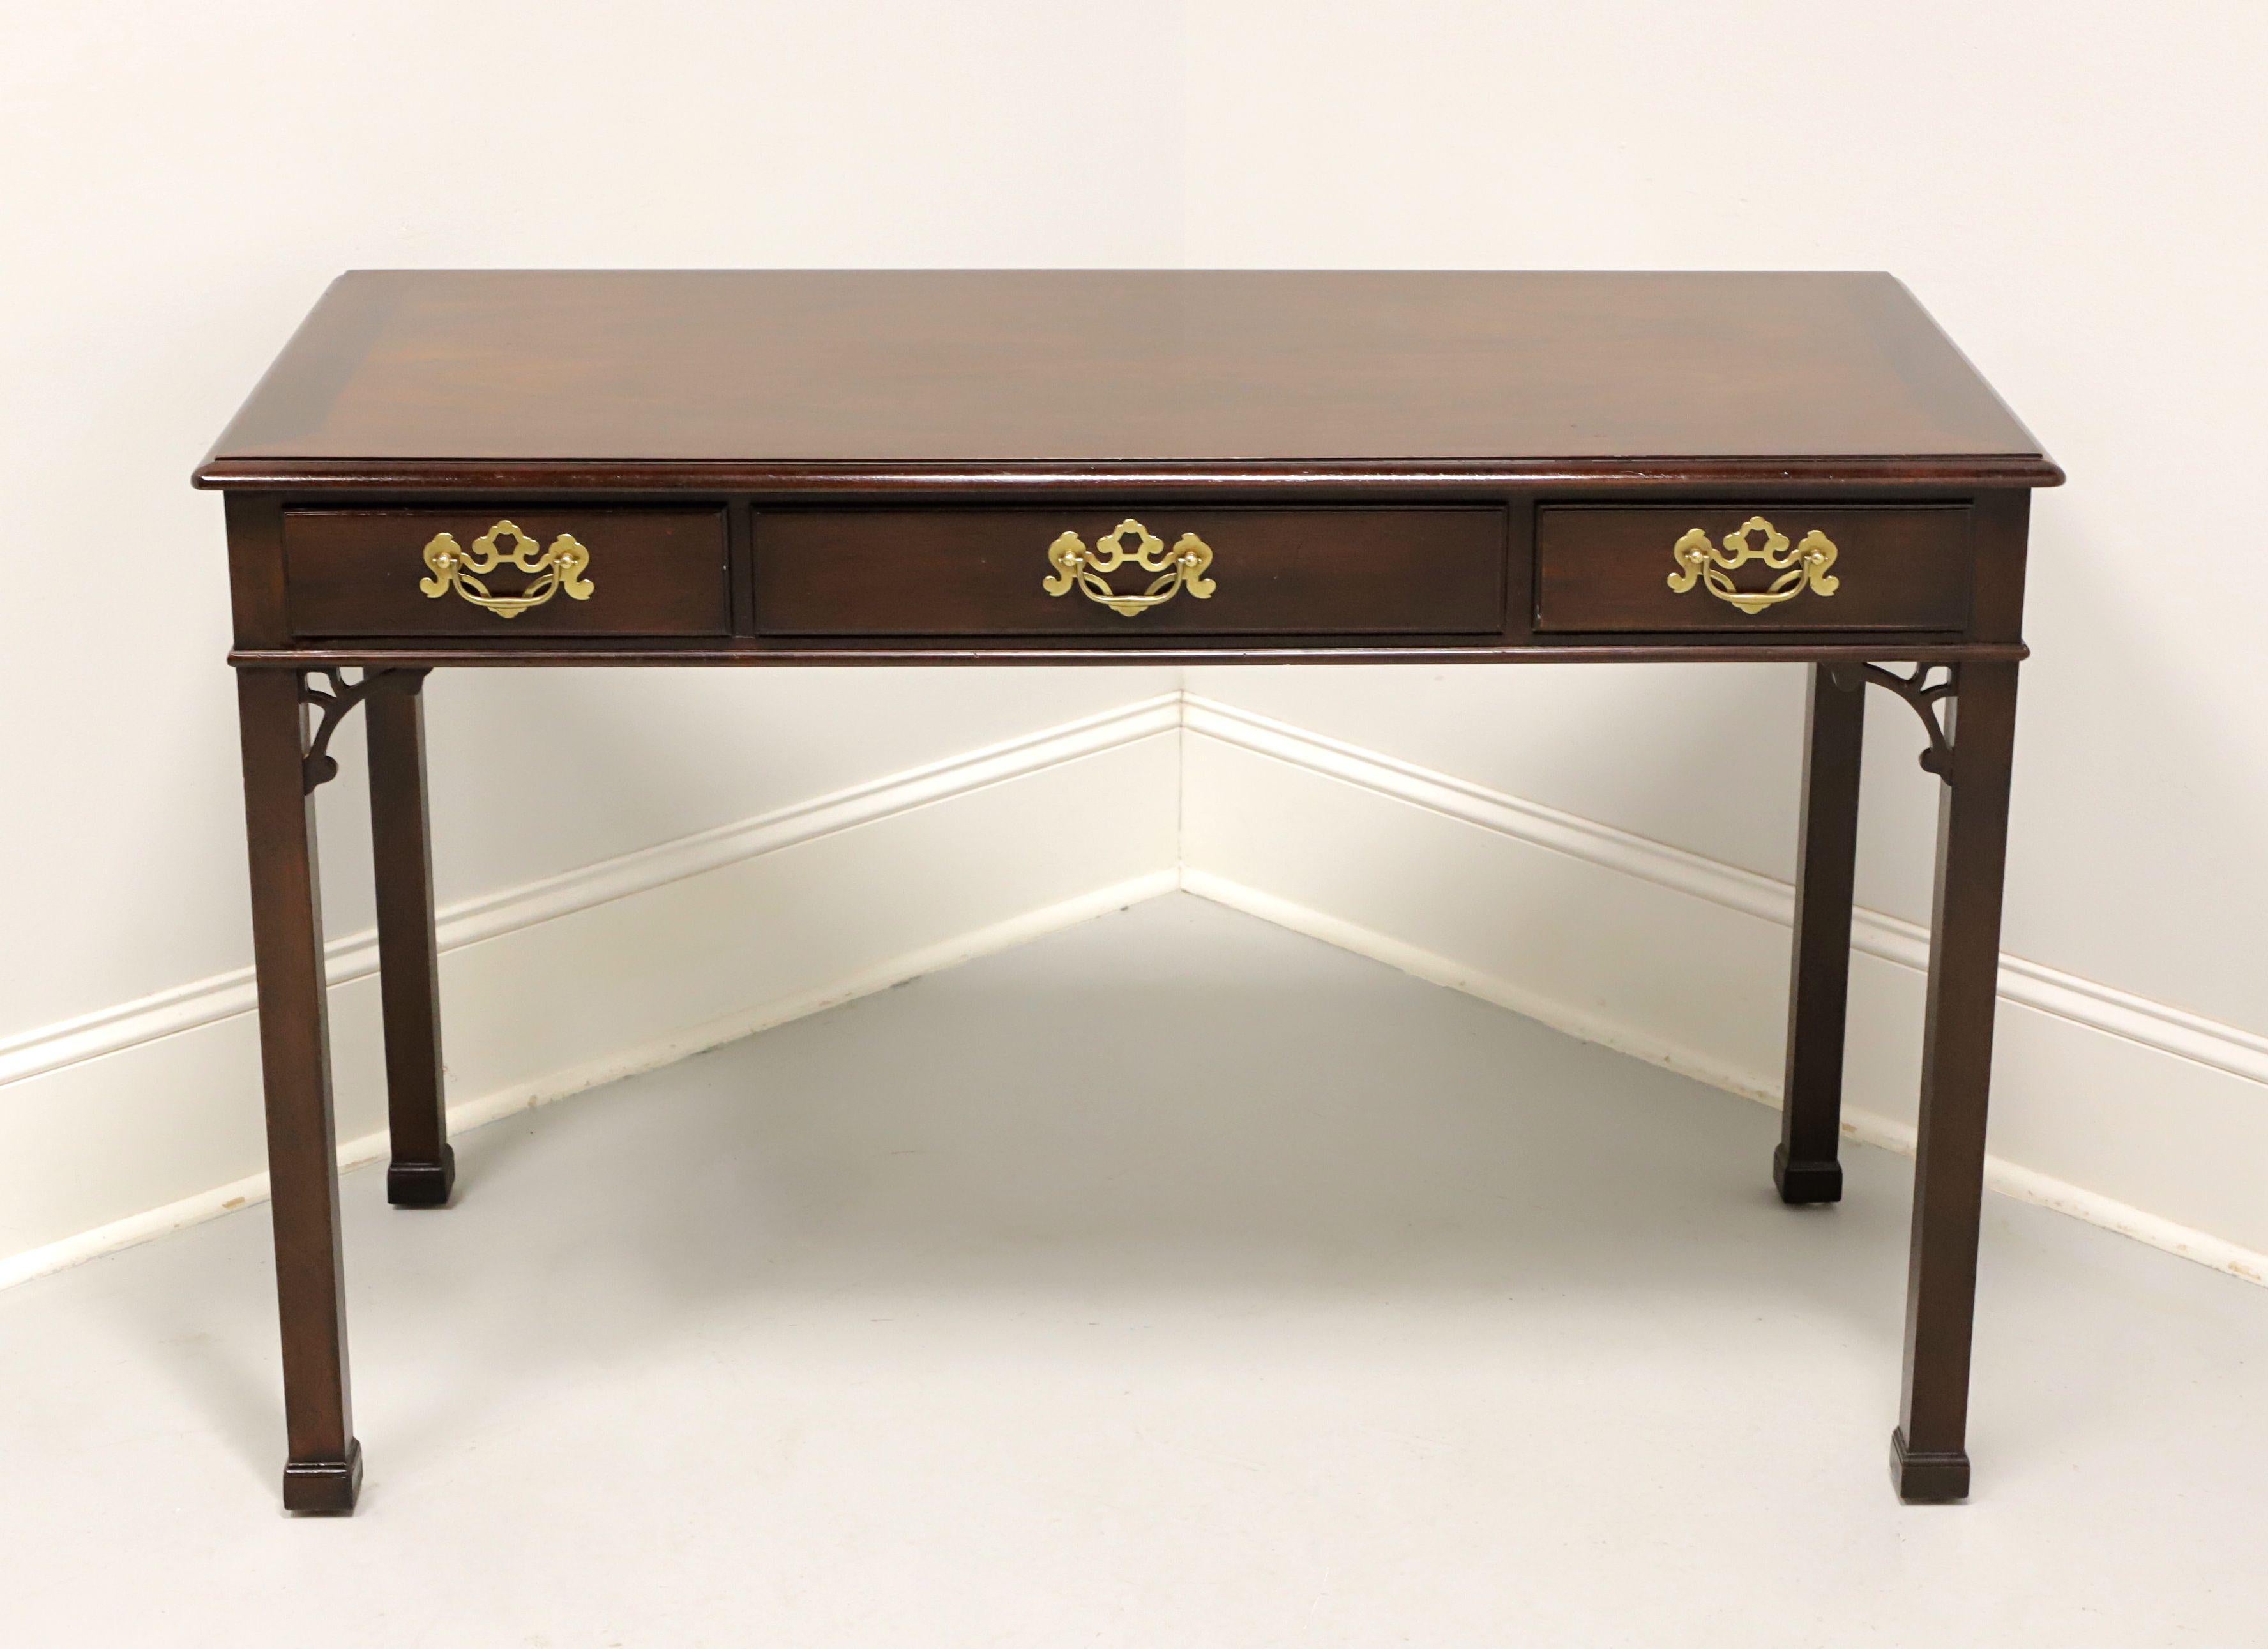 A Chippendale style writing desk by Henredon. Mahogany with banded bevel edged top, brass hardware, decorative fretwork arches to corners, square straight legs, and cap feet. Features three drawers of dovetail construction, with center drawer having